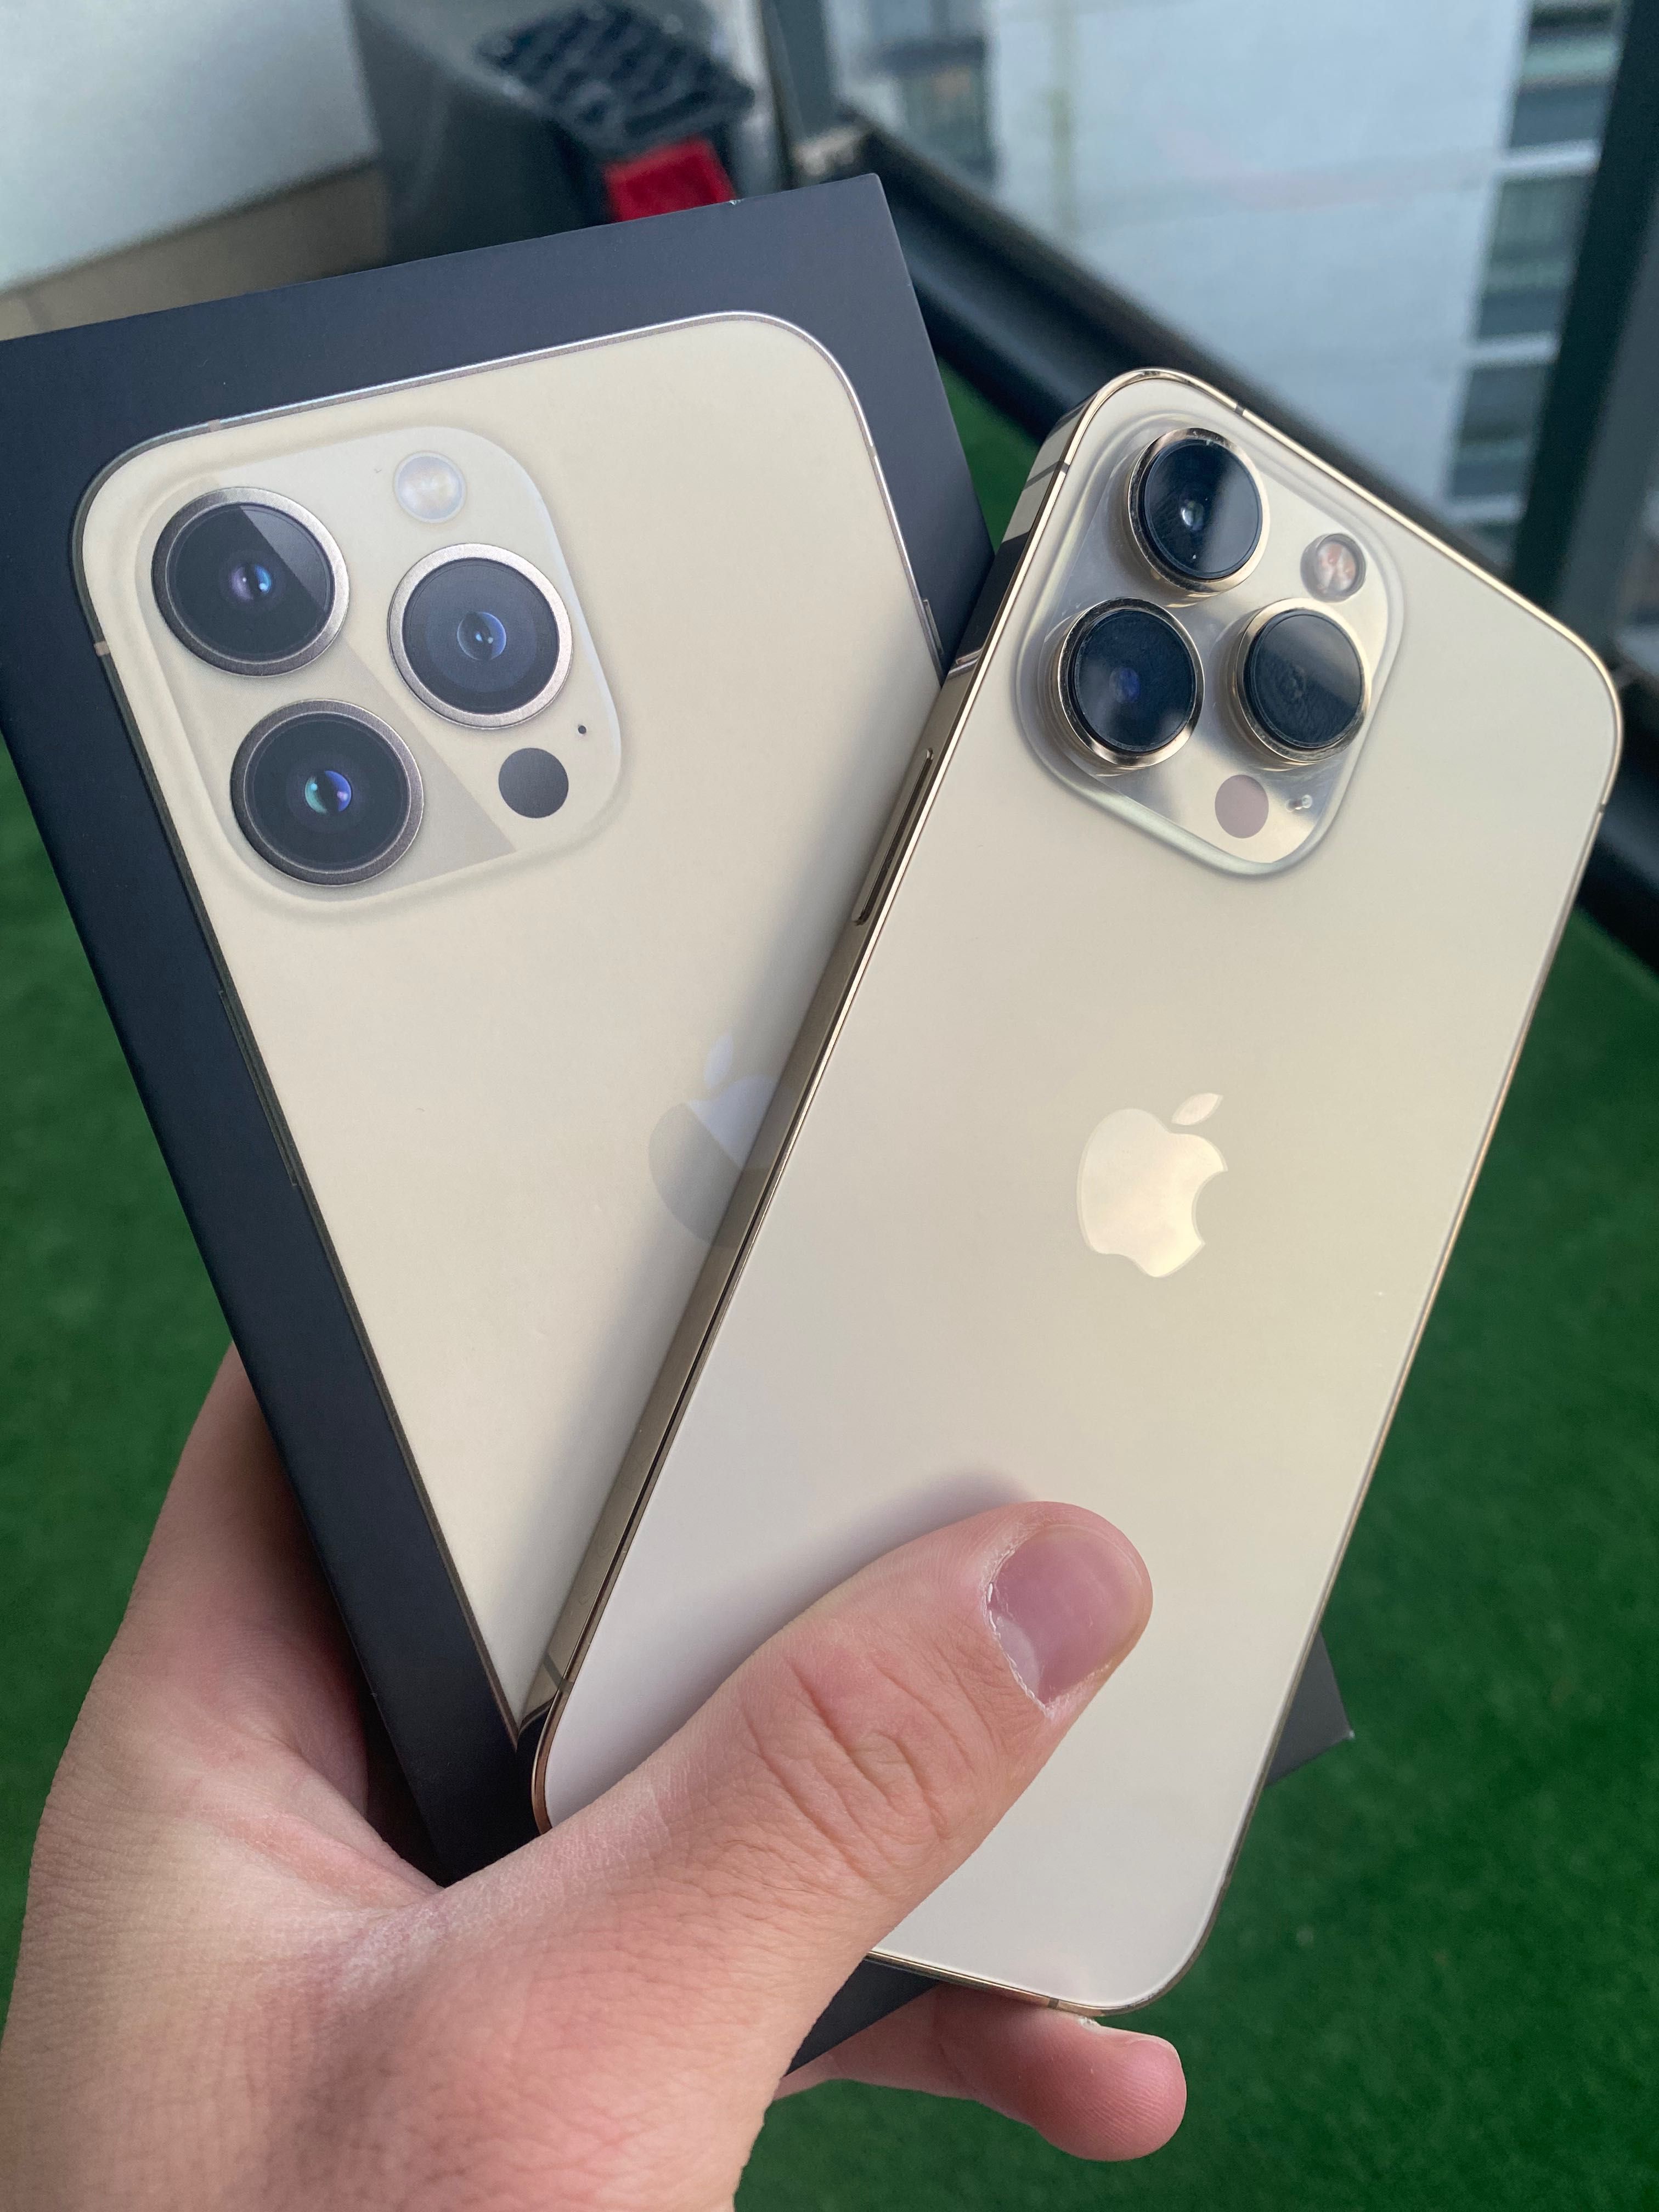 iPhone 13 Pro Gold Stan 10/10!!